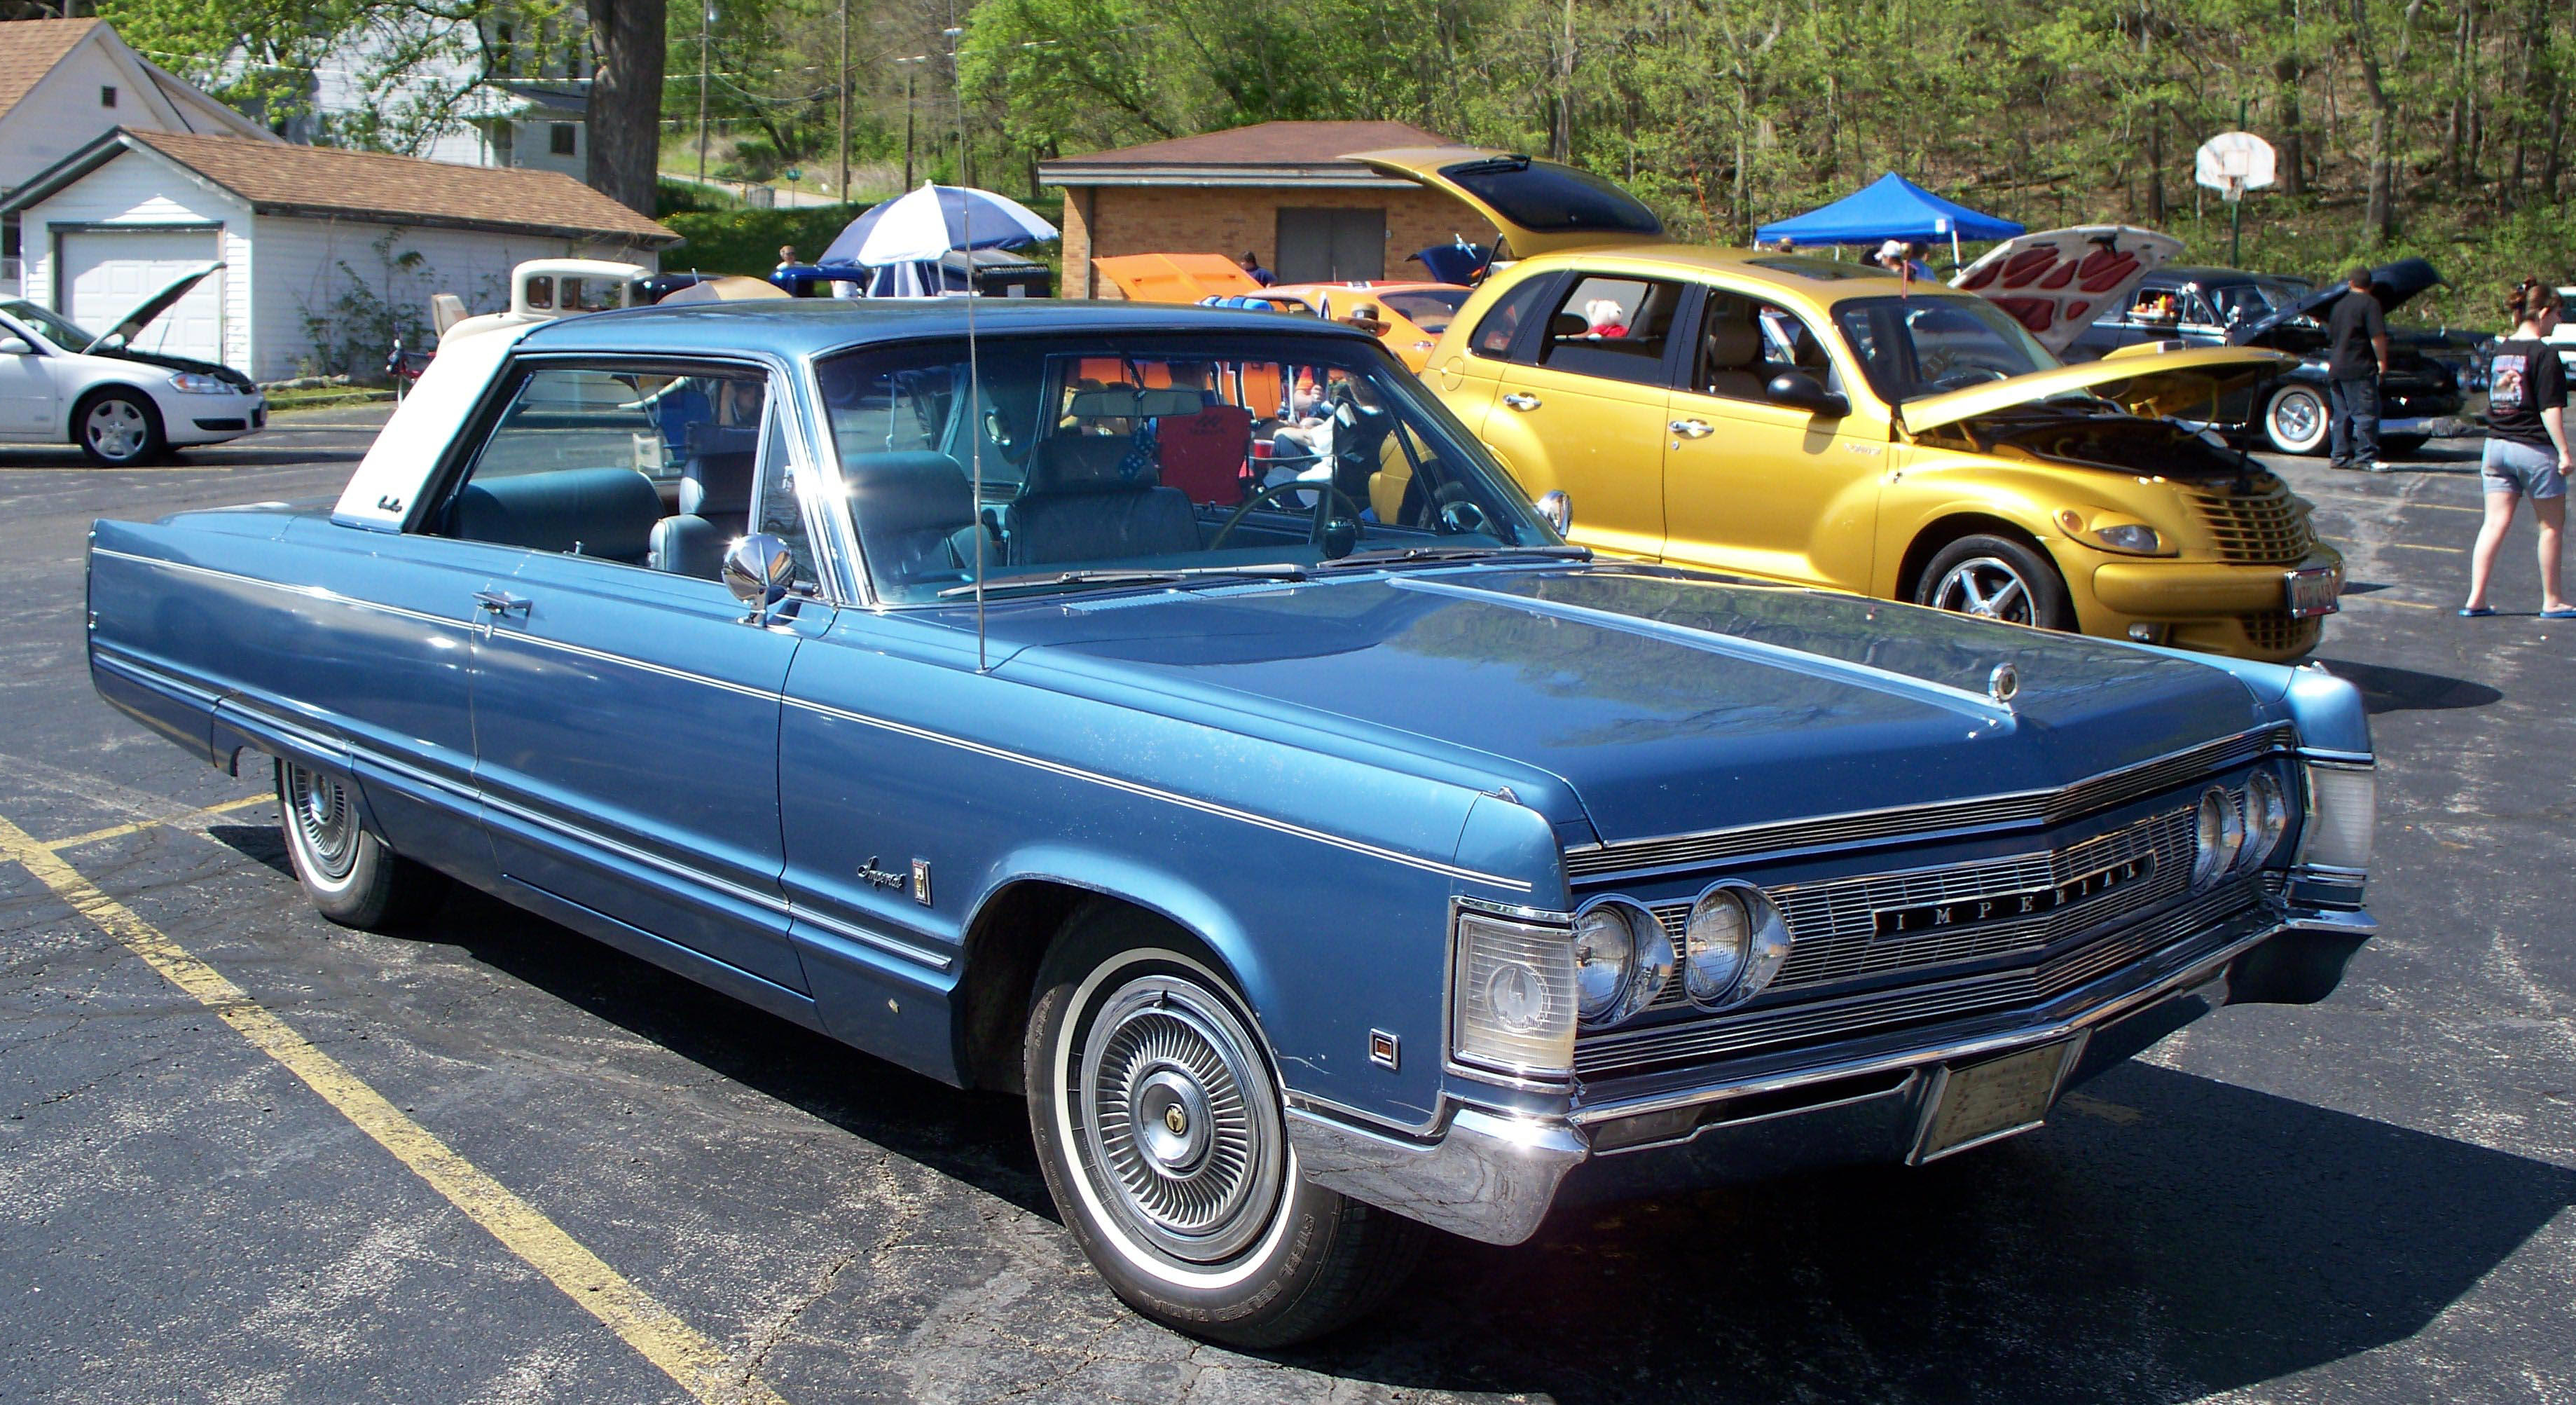 Arthur Schrader's 1967 Chrysler Imperial Crown Coupe